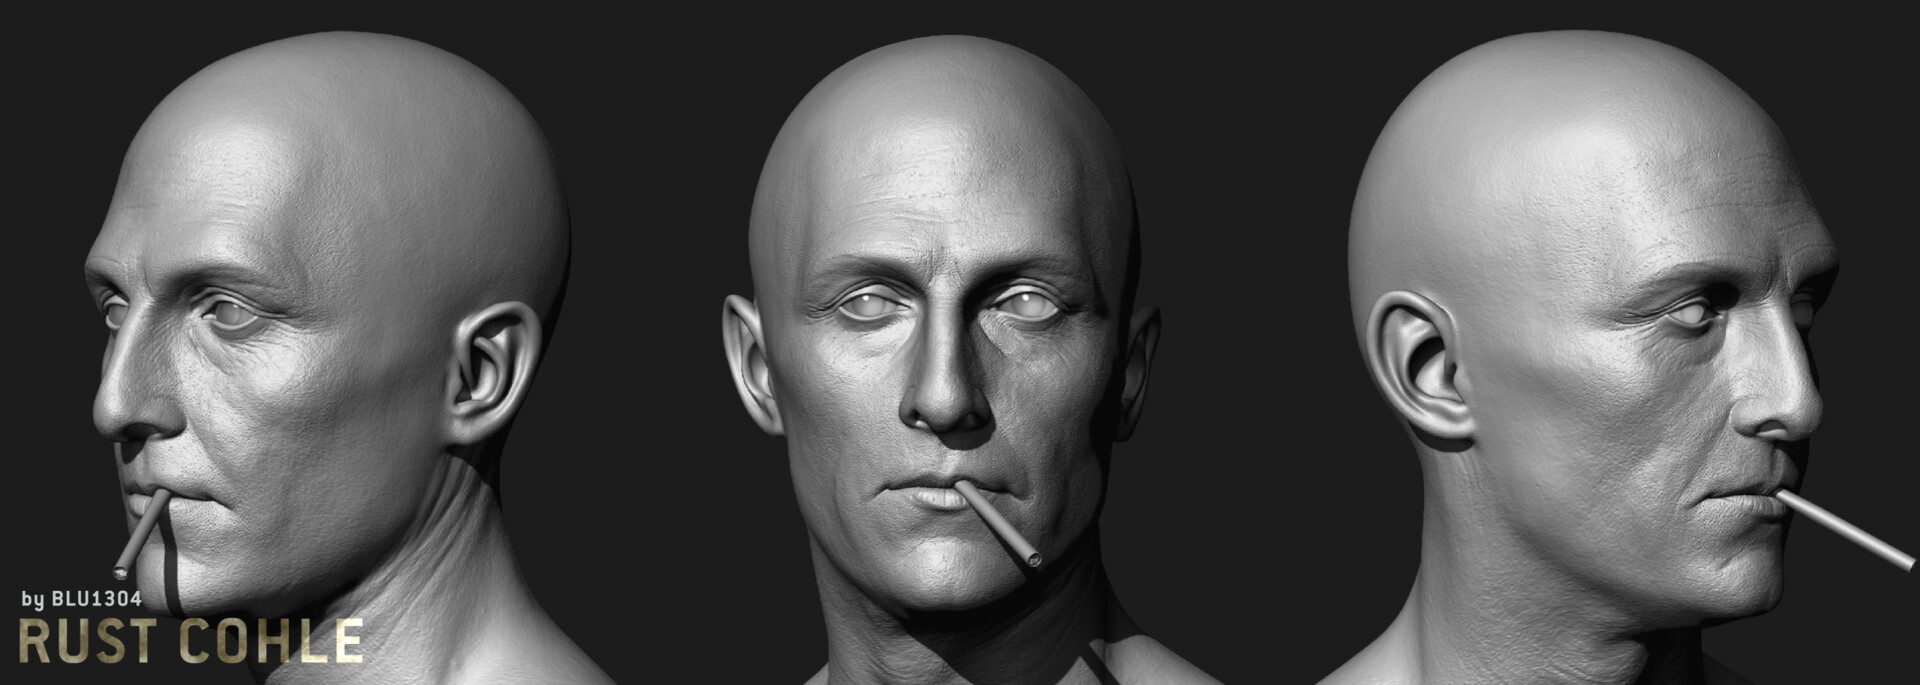 Zbrush sculpt of rust cohle from true detective 